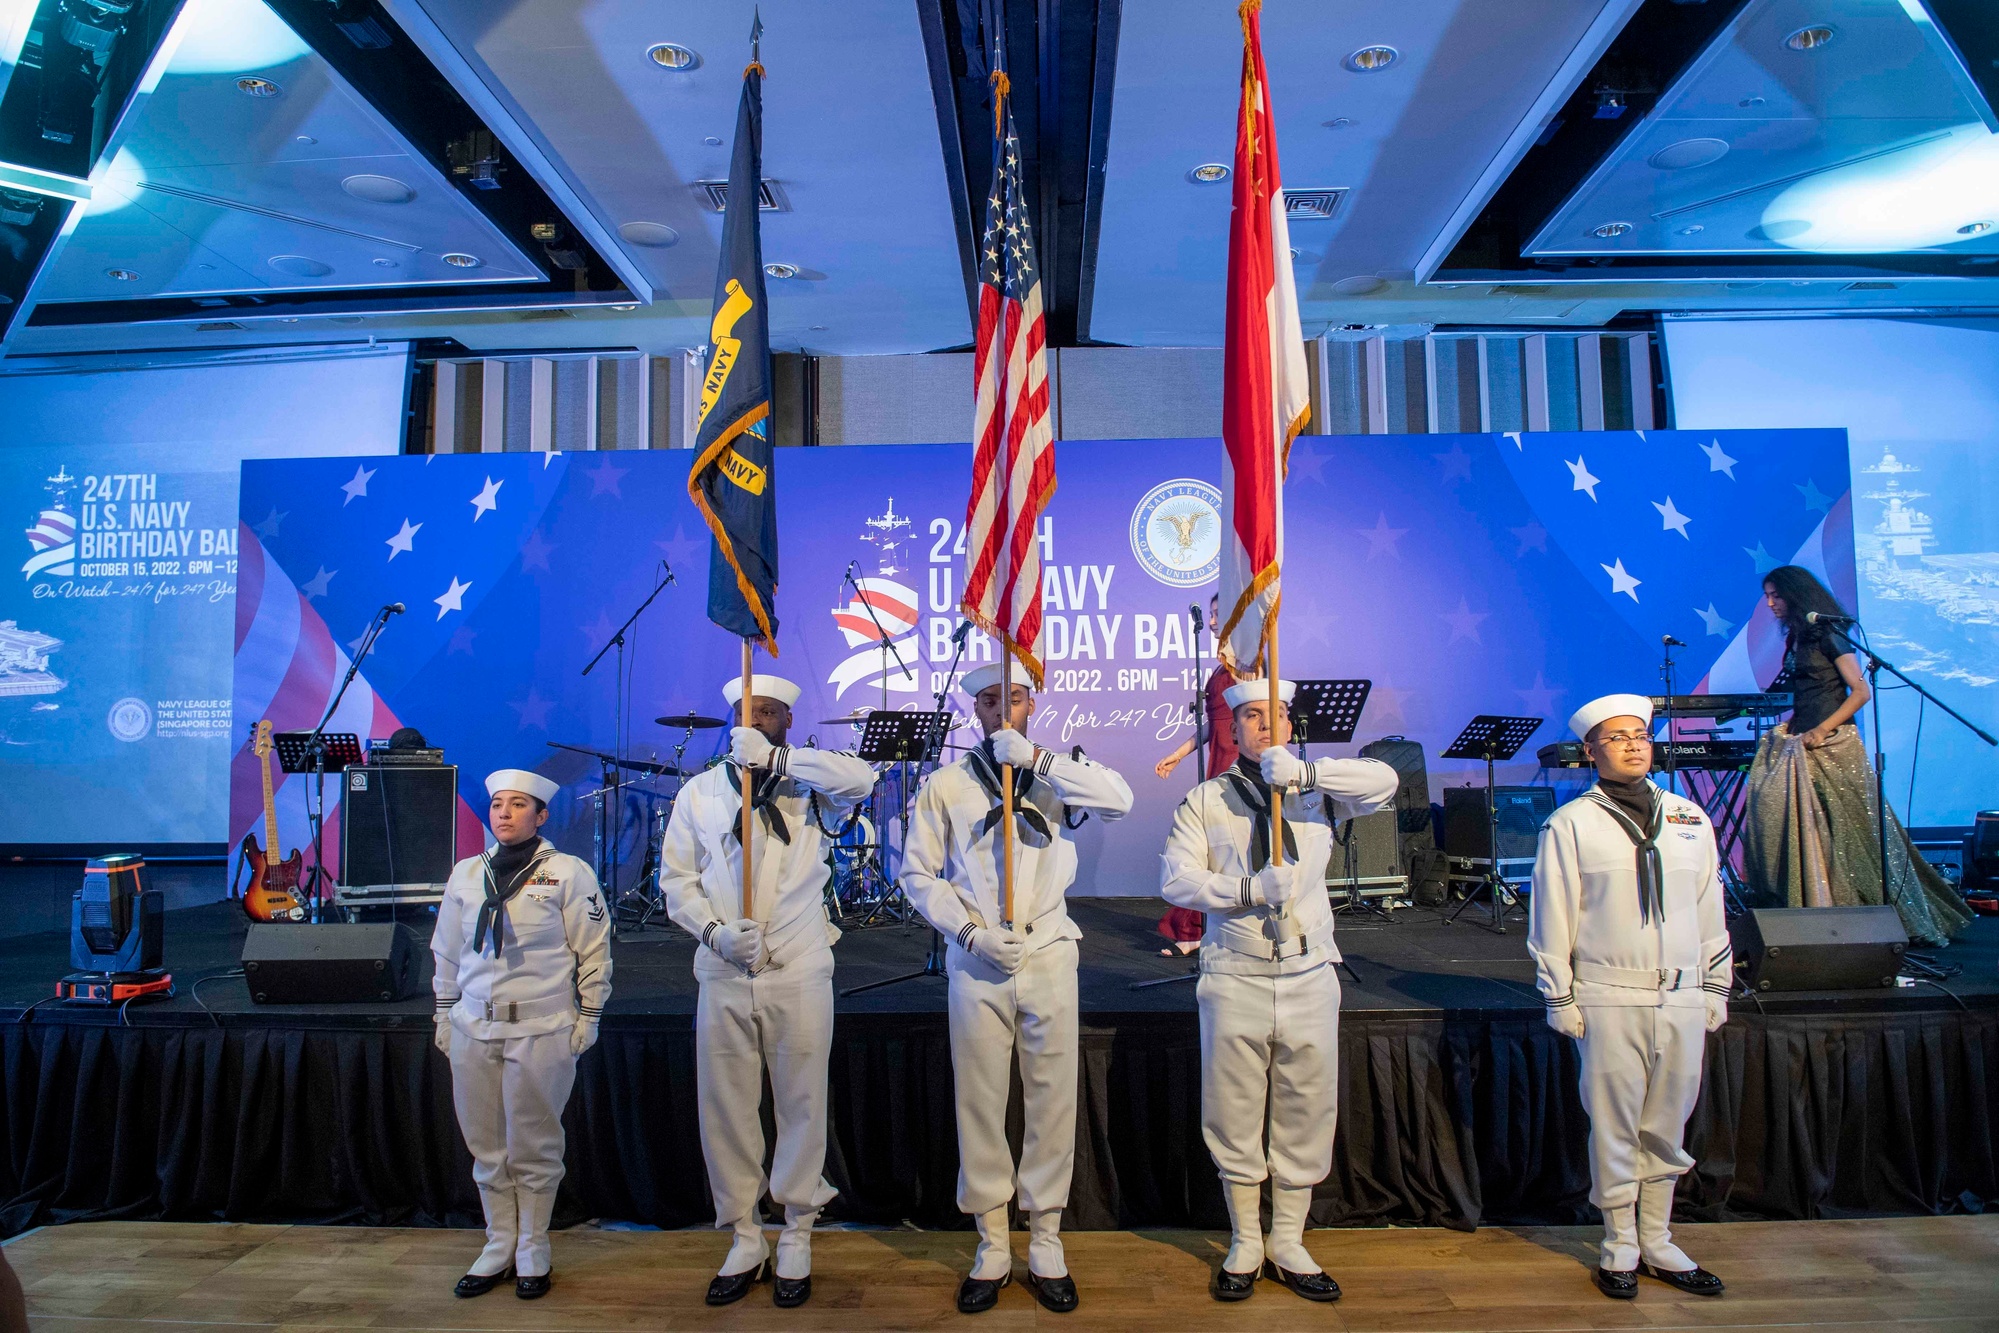 DVIDS - Images - U.S. Navy Ball 2022 in Singapore [Image 1 of 4]